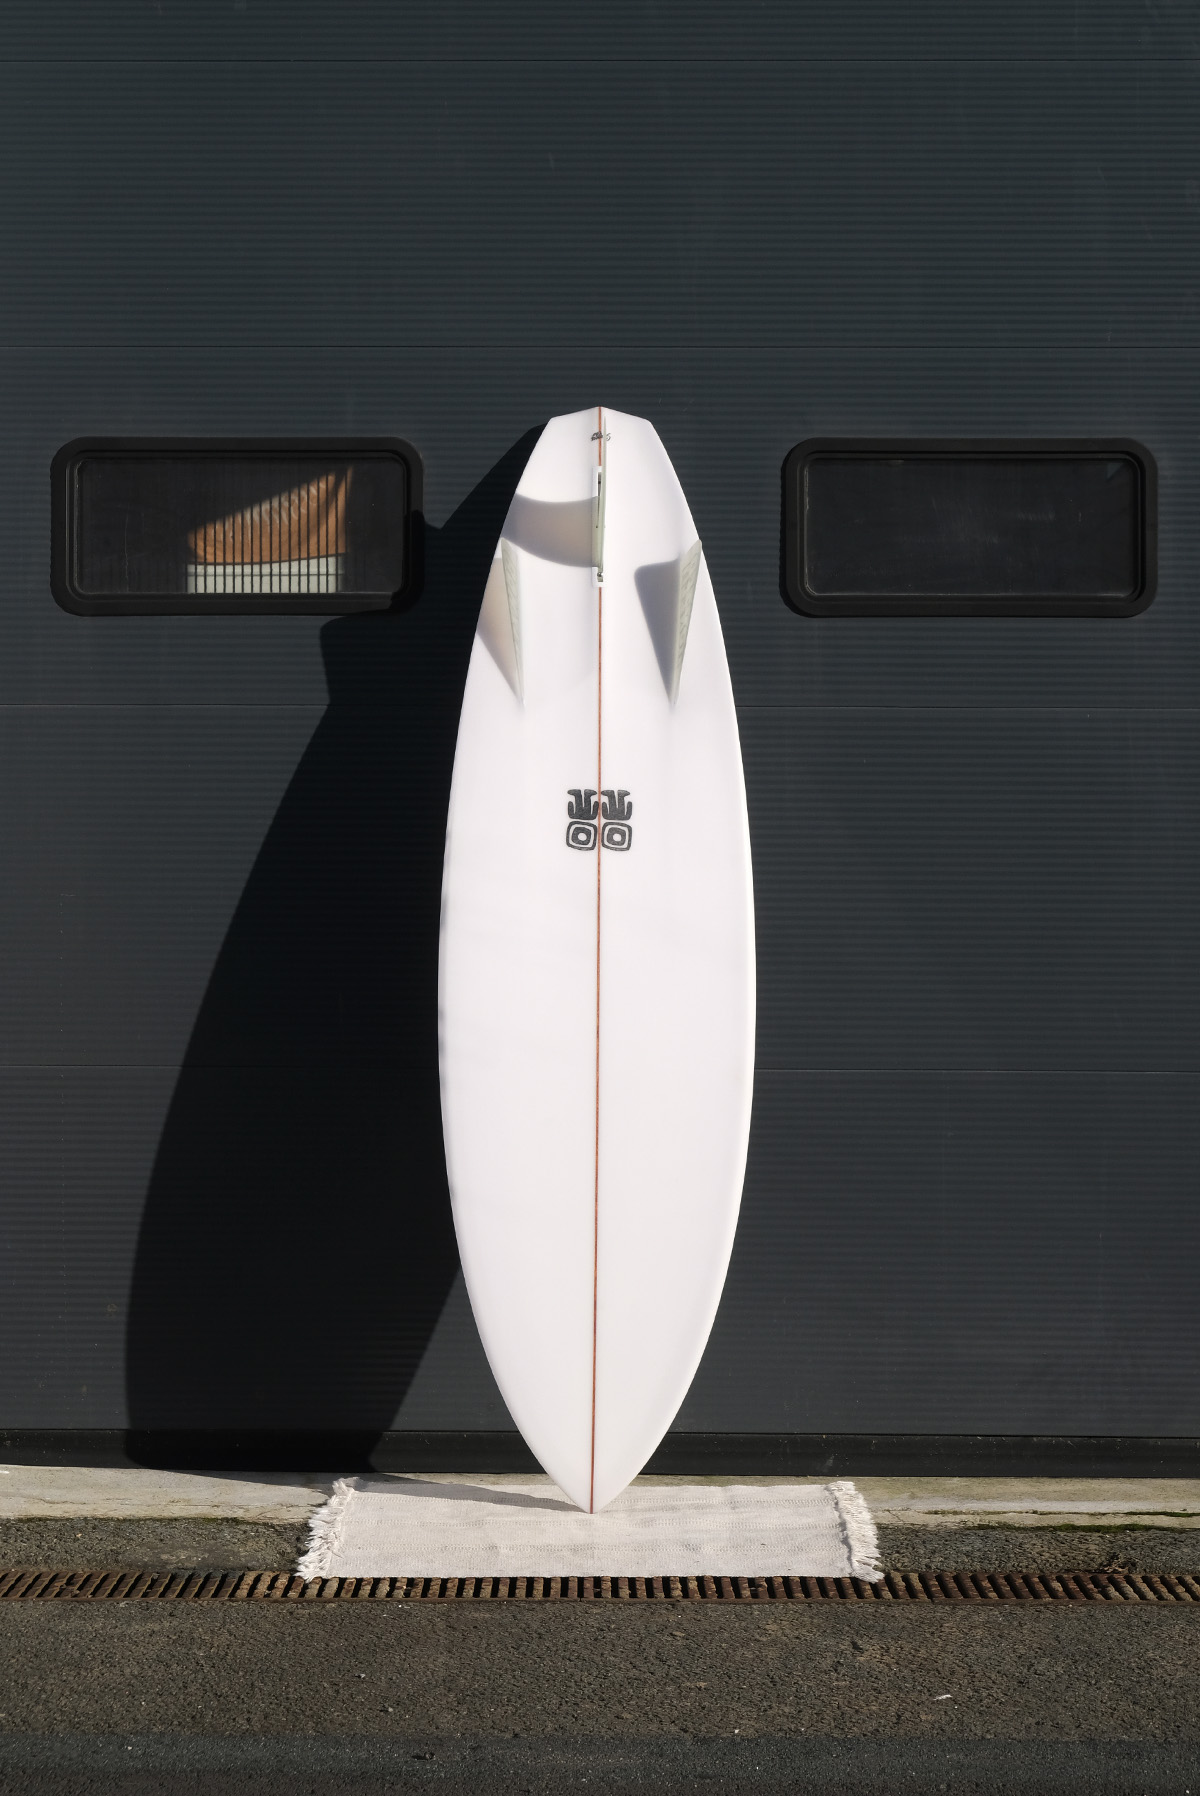 campbell-brothers-deck-surfboard-6'0"